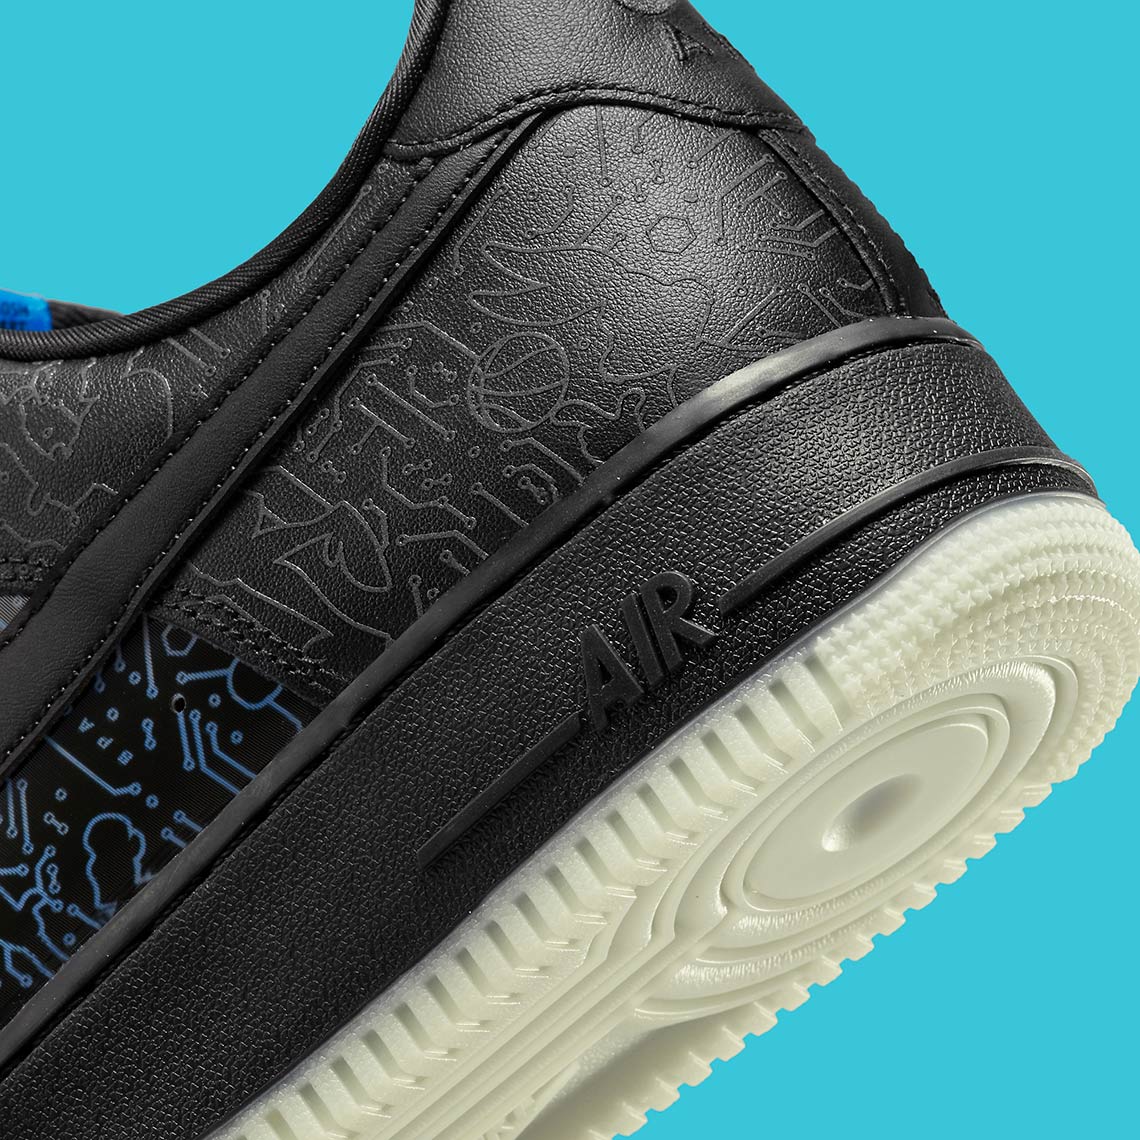 Space Jam Nike Air Force 1 Computer Chip Dh5354 001 1